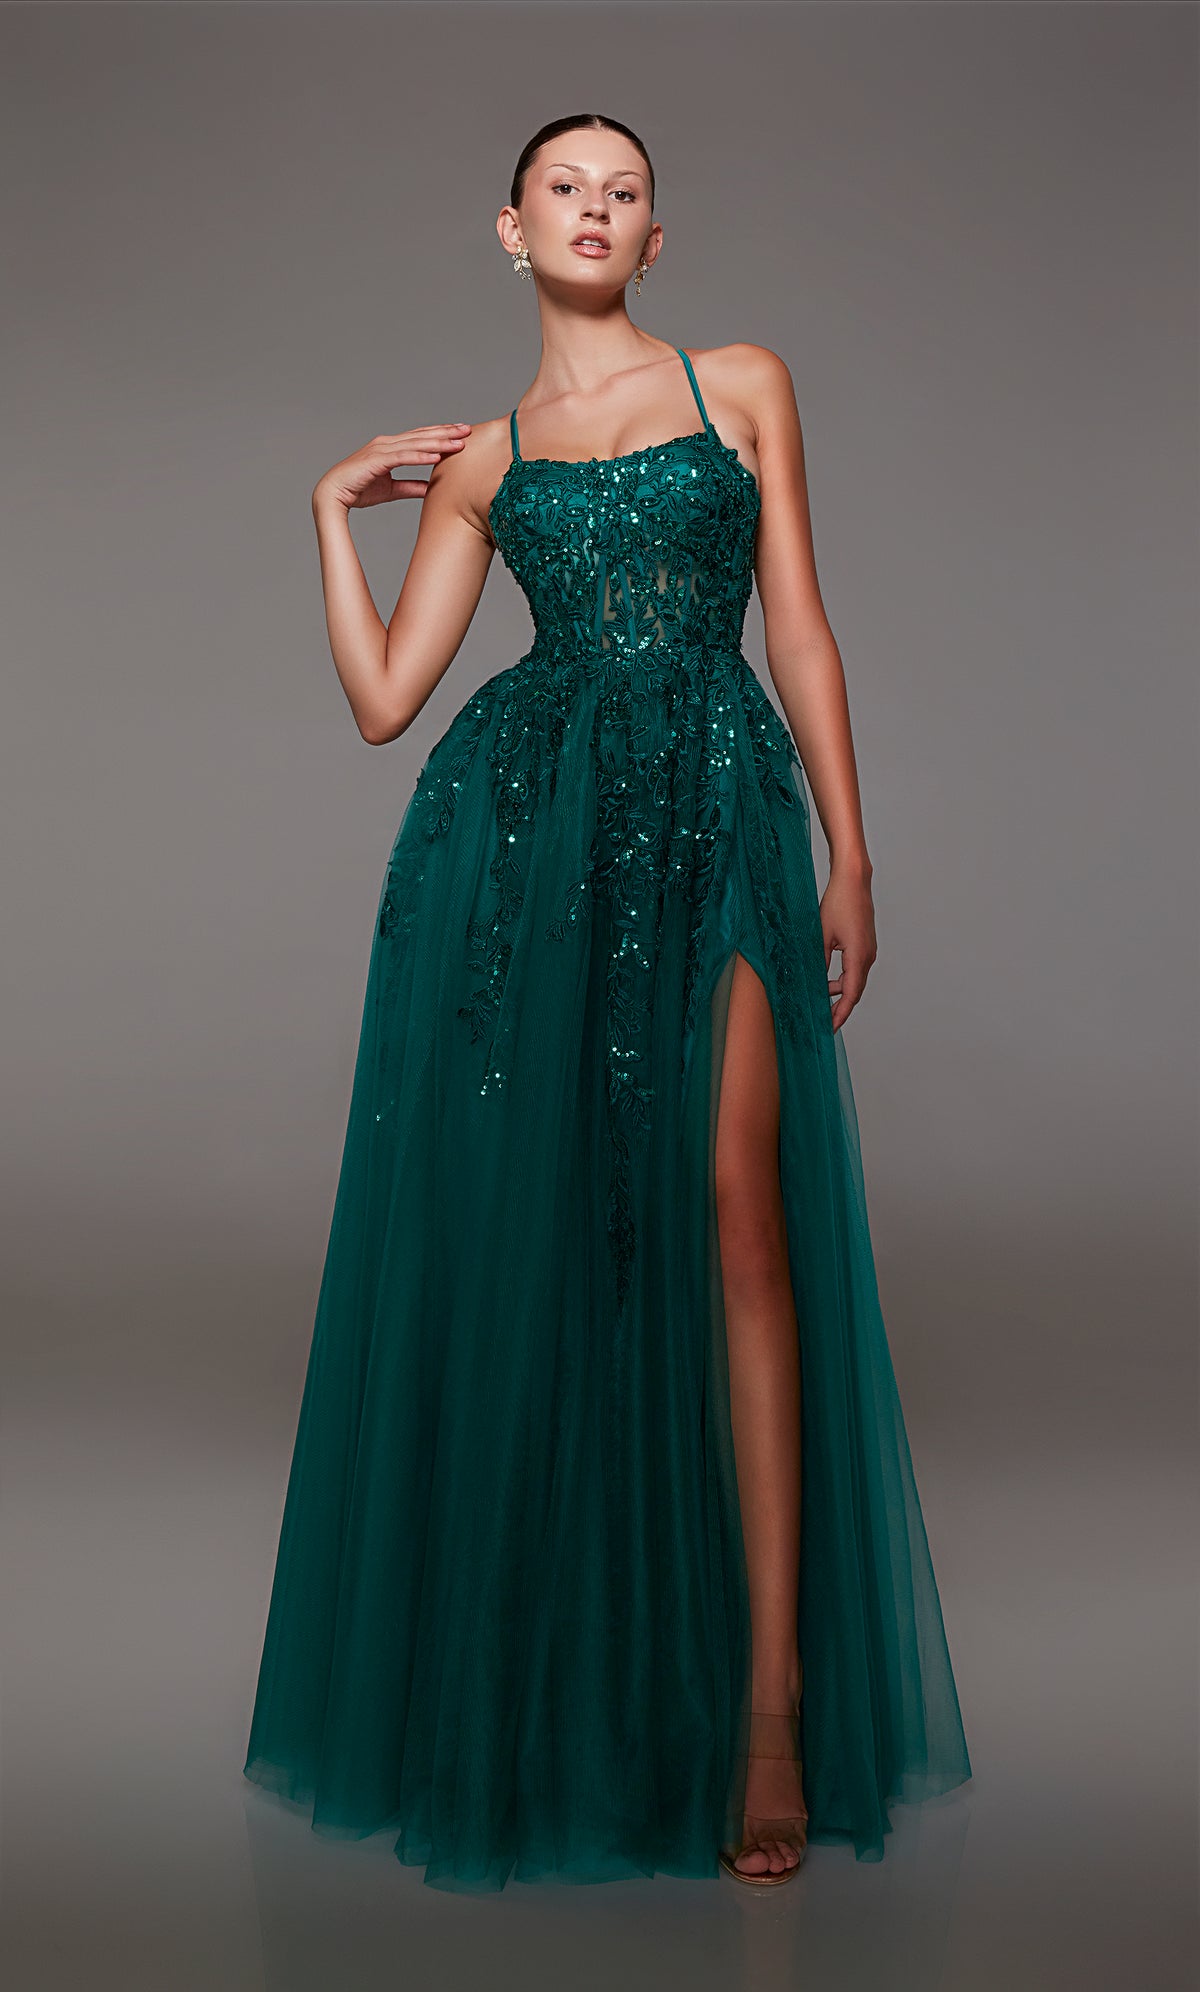 Green prom dress: sheer corset bodice, full tulle skirt with front slit, lace-up back, and intricate floral lace appliques for an enchanting look.